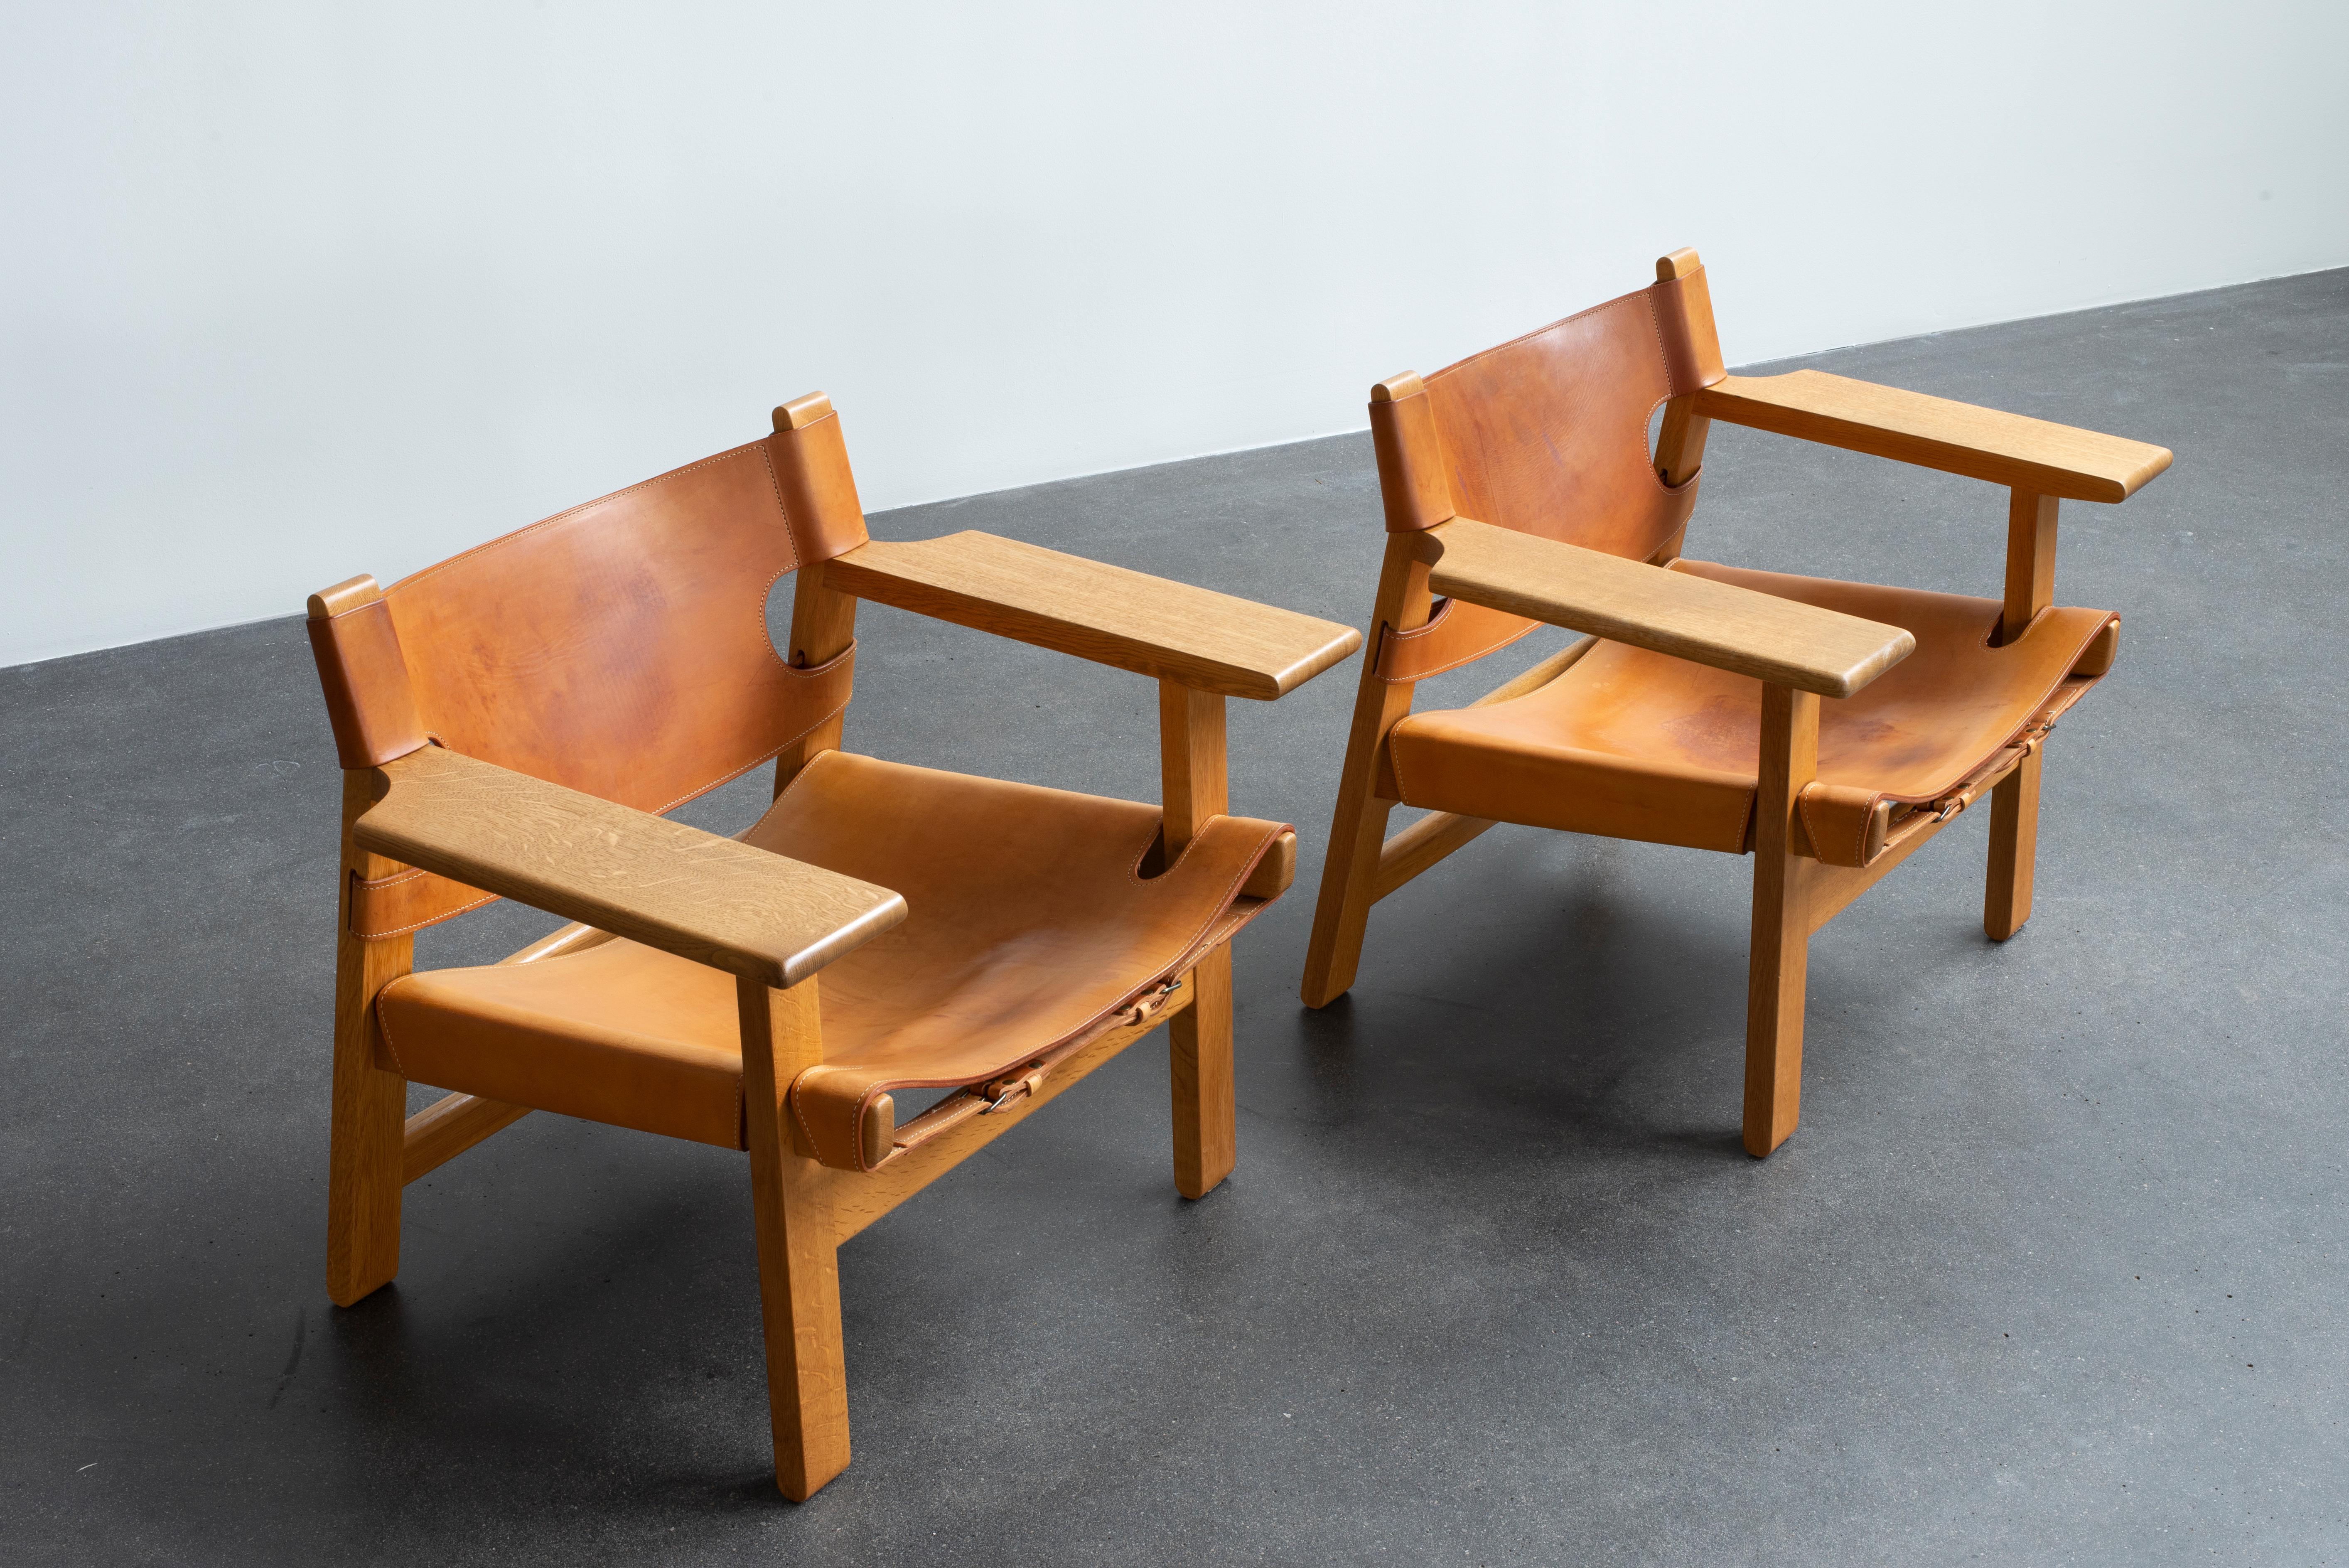 Børge Mogensen pair of Spanish chairs in oak and vegetable-tanned leather. Executed by Fredericia furniture.